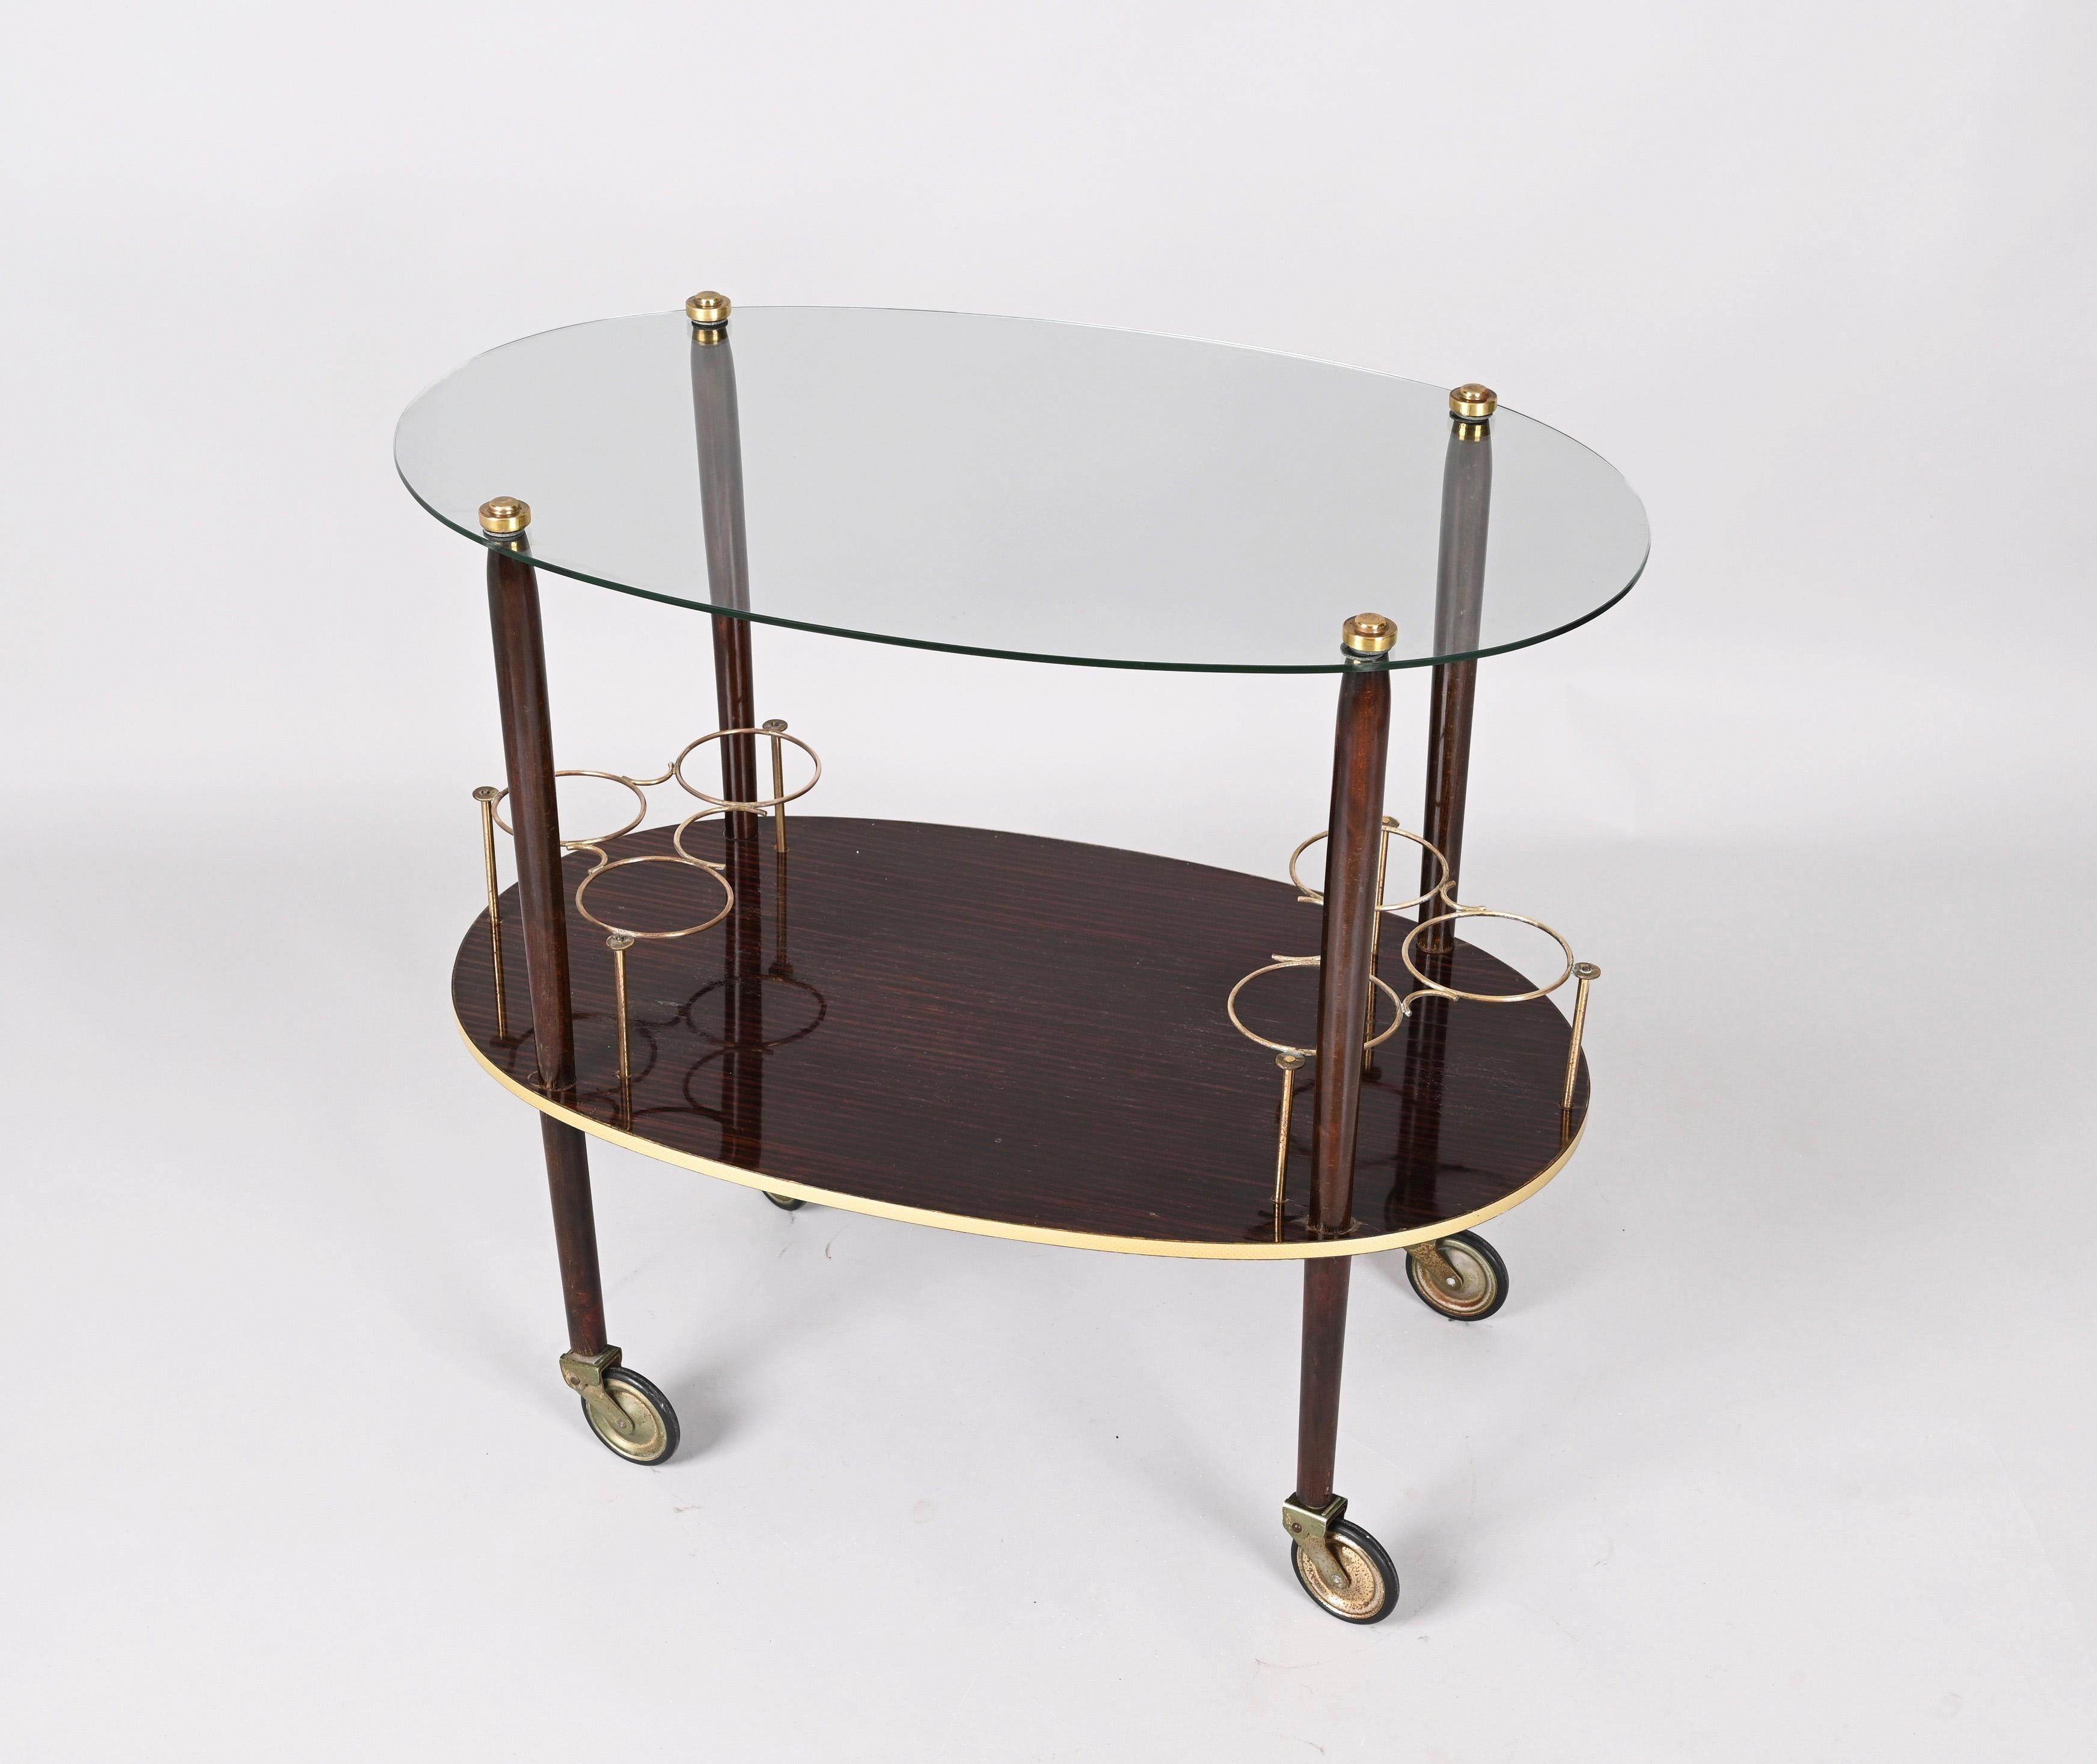 Cesare Lacca Midcentury Italian Wood Bar Cart with Glass Serving Tray, 1950s For Sale 2